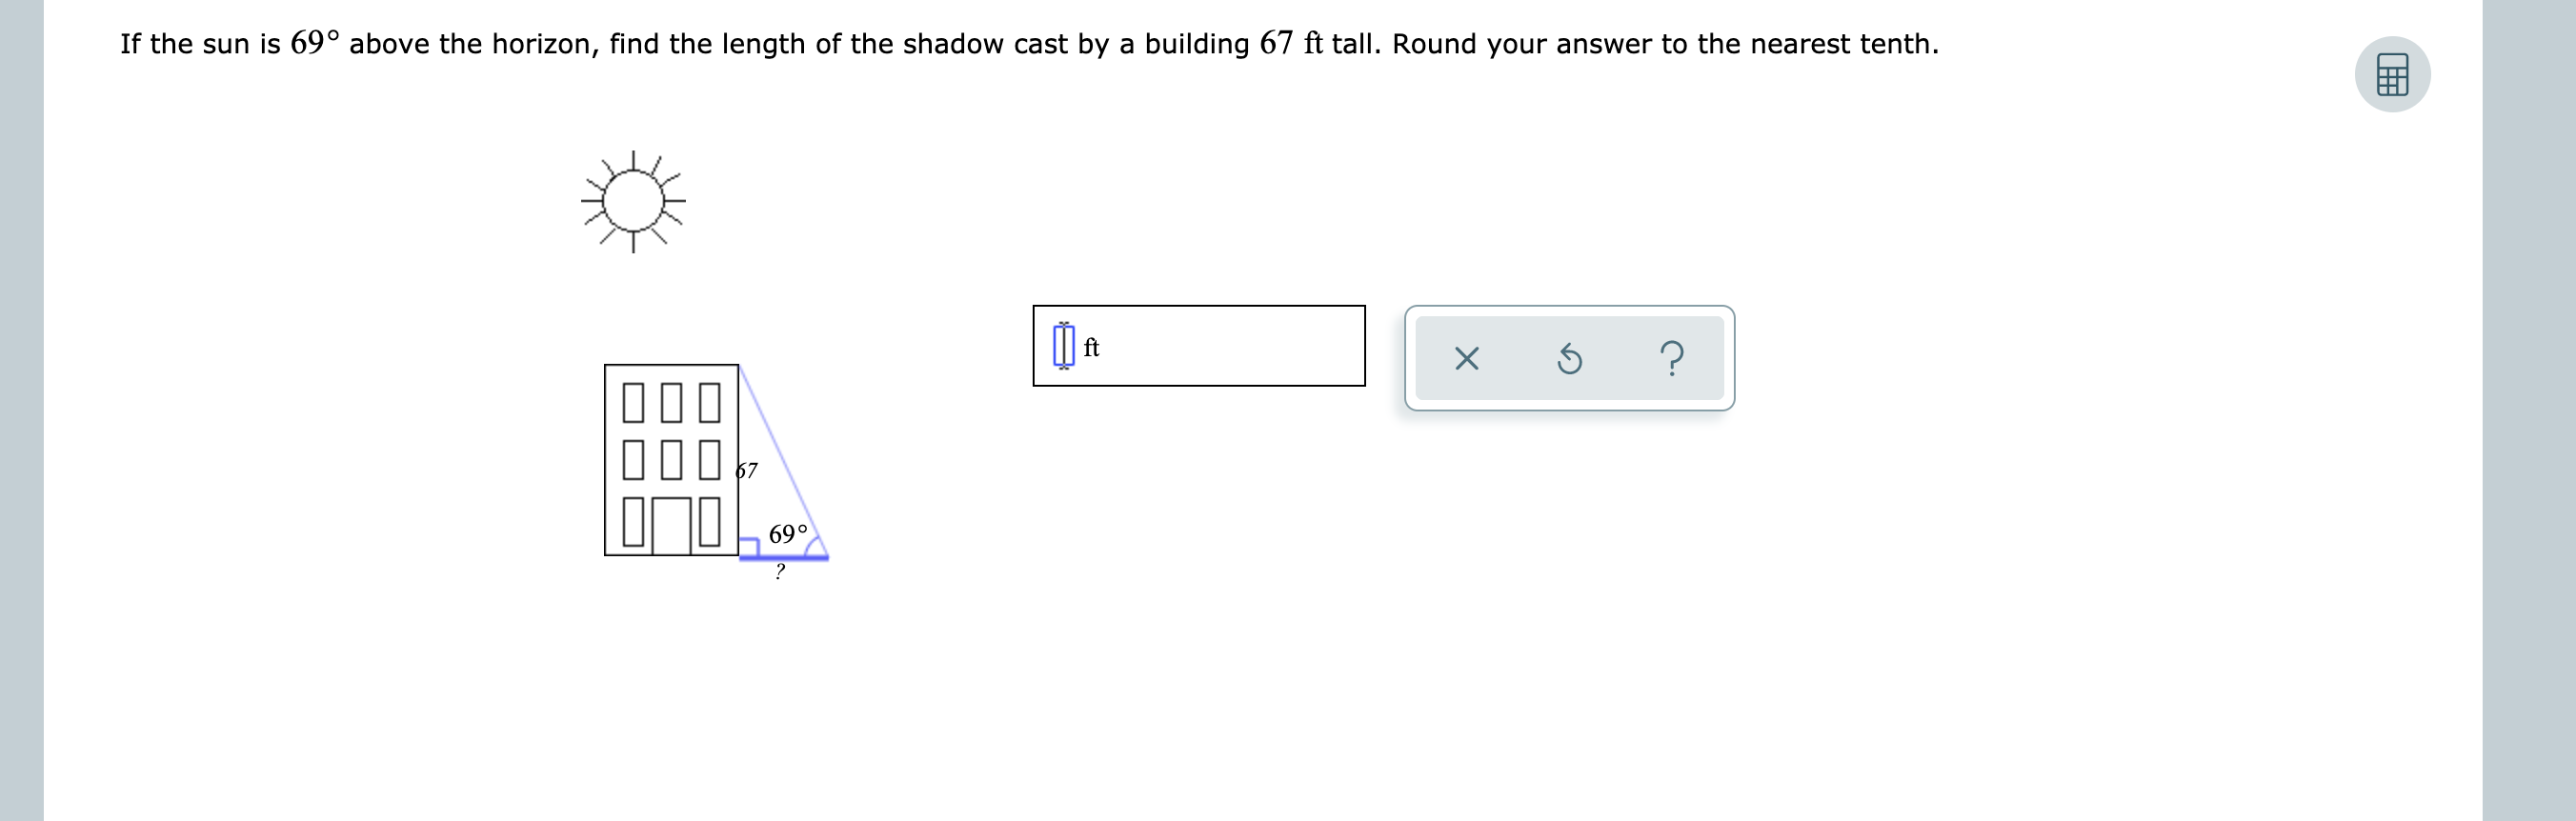 If the sun is 69° above the horizon, find the length of the shadow cast by a building 67 ft tall. Round your answer to the nearest tenth.
ft
?
10
690
?
